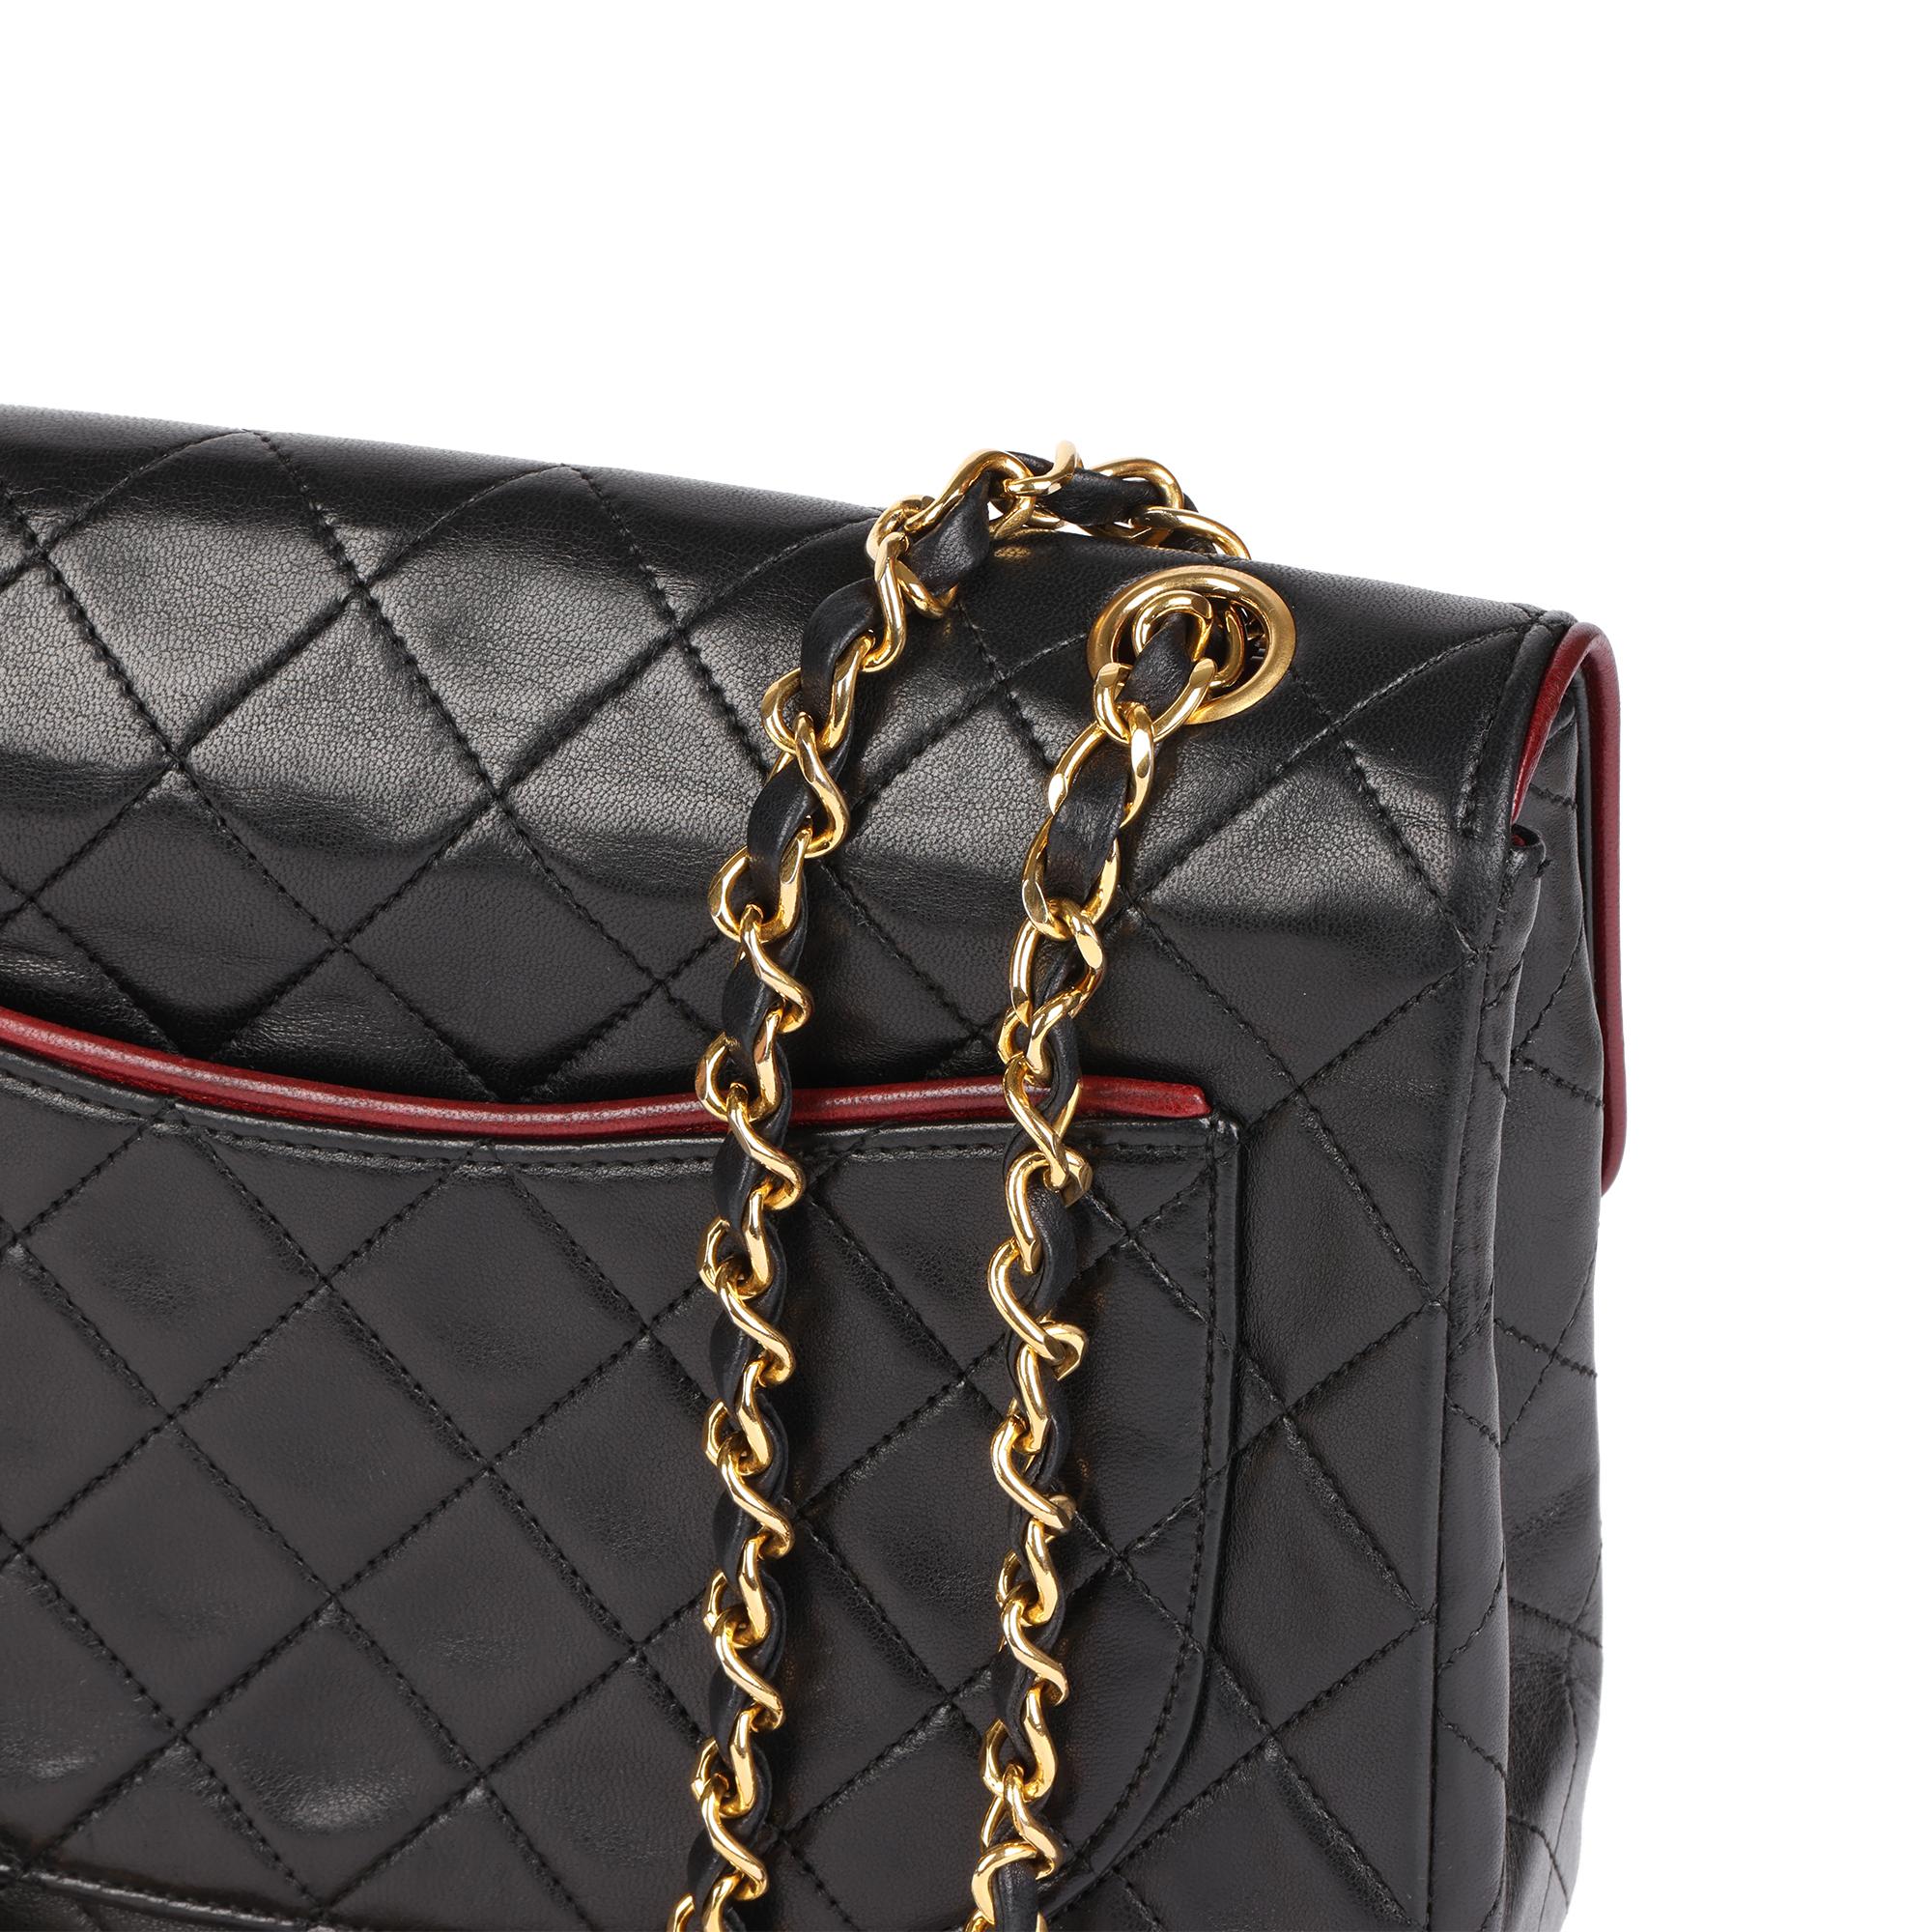 CHANEL Black Quilted Lambskin Vintage Medium Classic Single Flap Bag with Red Tr For Sale 2